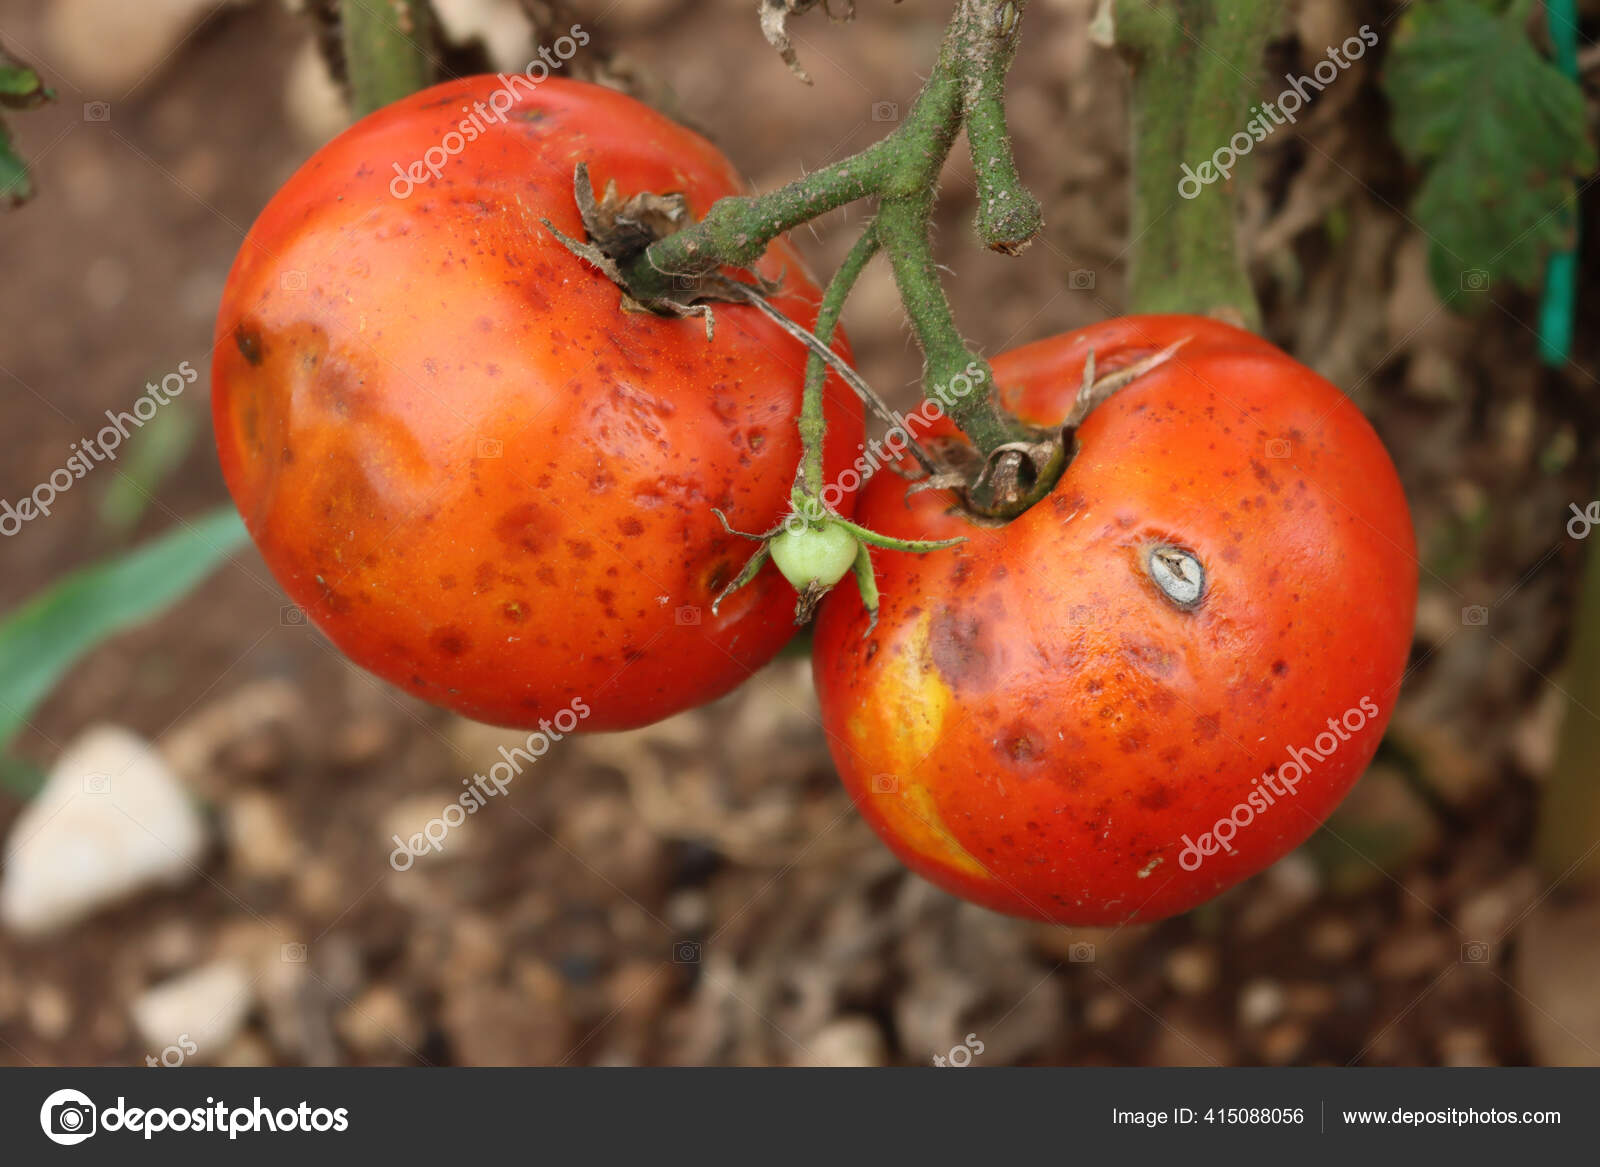 Red - Rotten Tomatoes